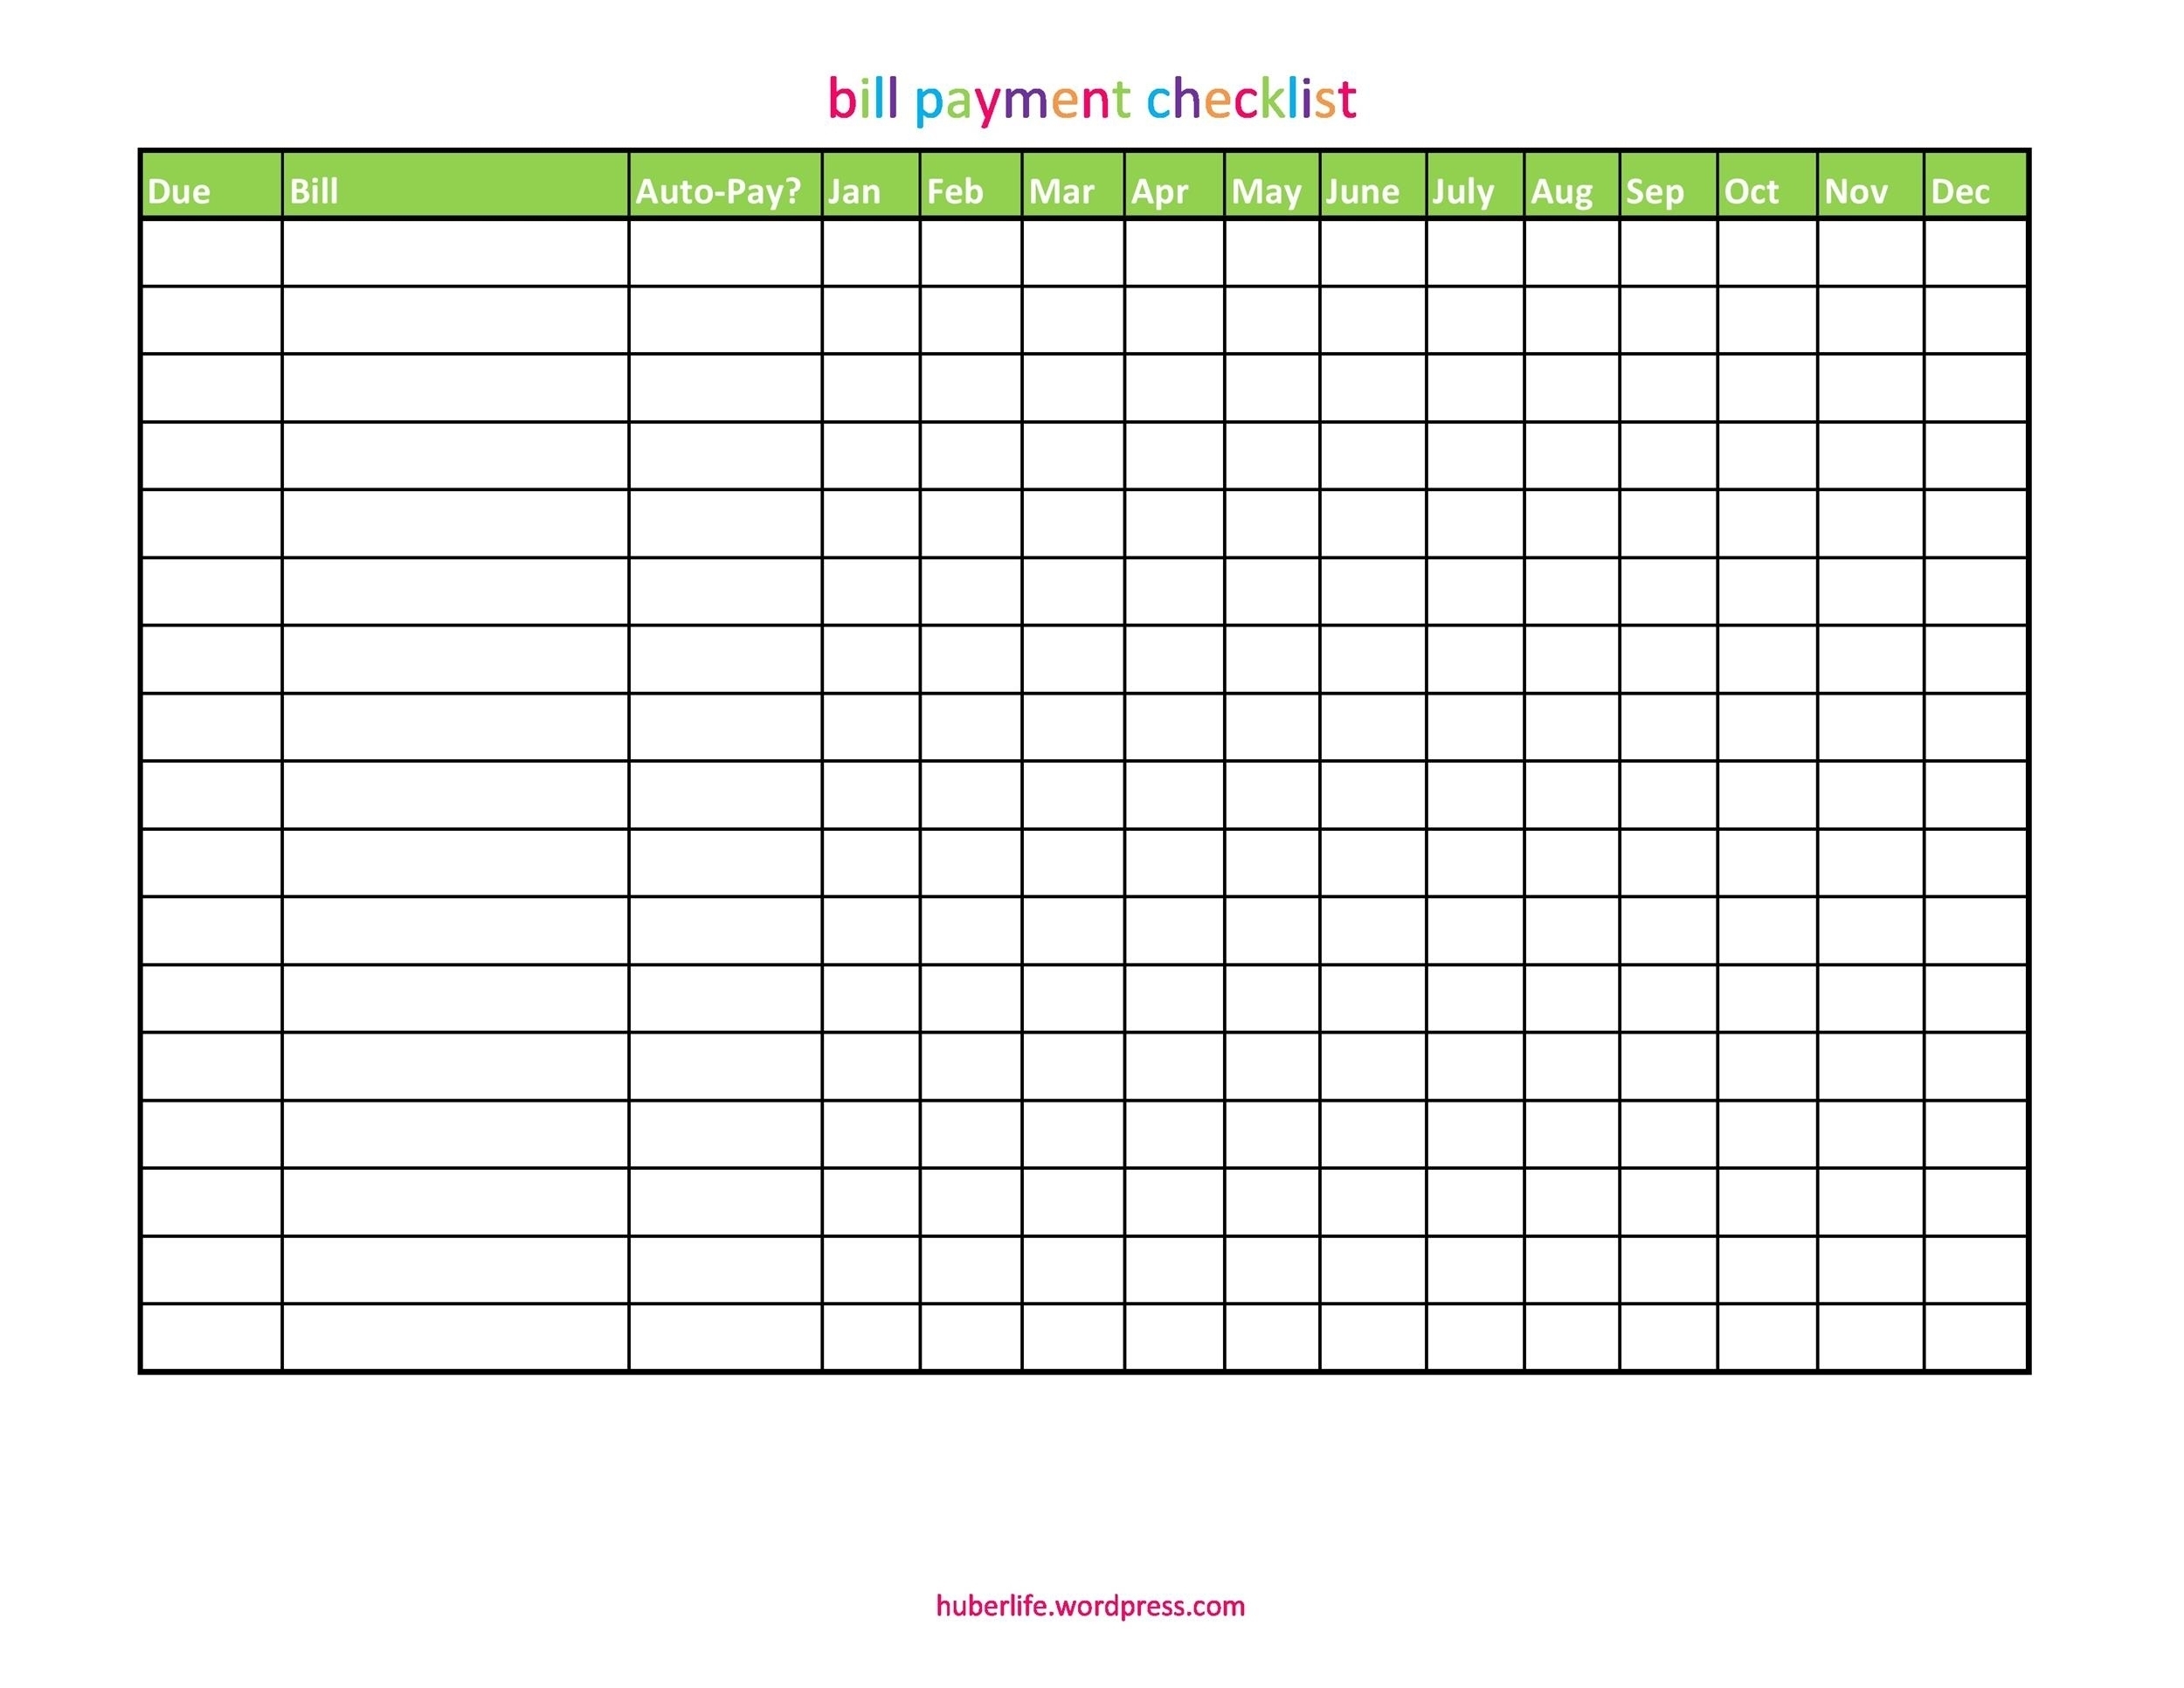 Take Different Bills That Are Due Each Month